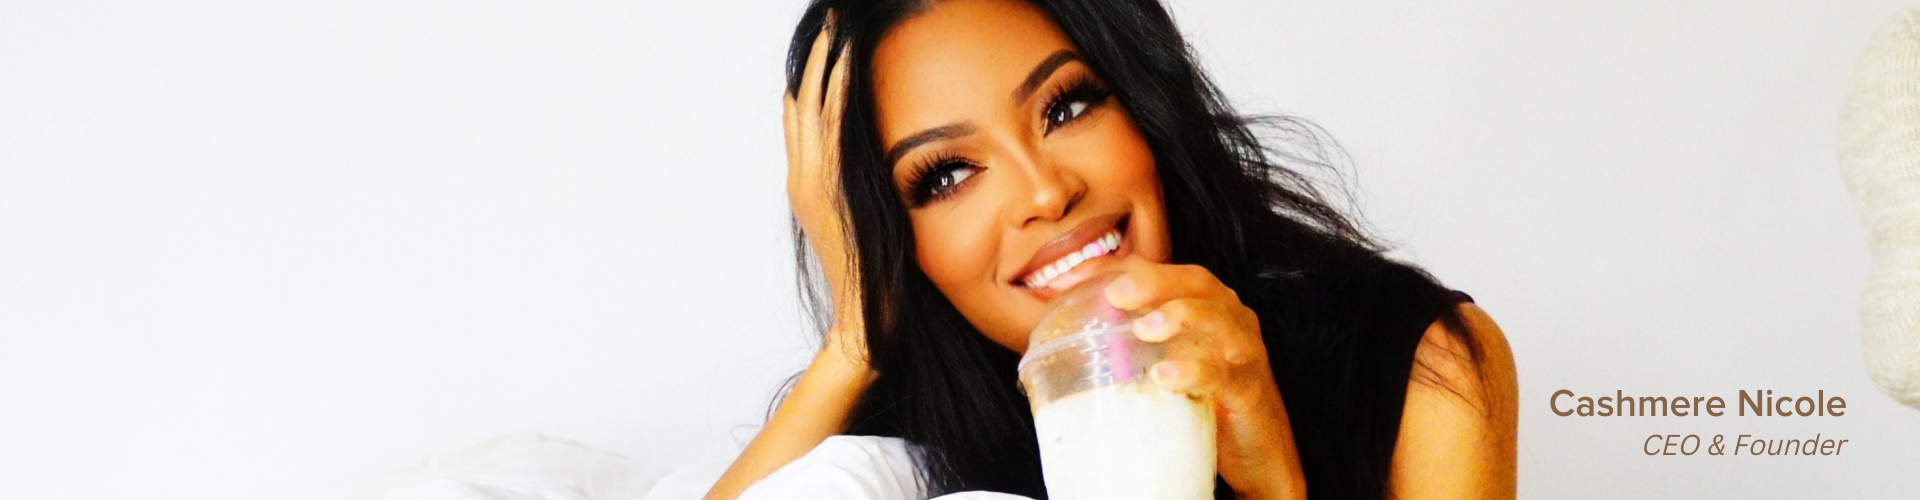 Cashmere Nicole, Founder and CEO of Beauty Bakerie is laying down smiling while drinking a milkshake. Pinktober October Breast Cancer Awareness Month Breastcancer survivor.